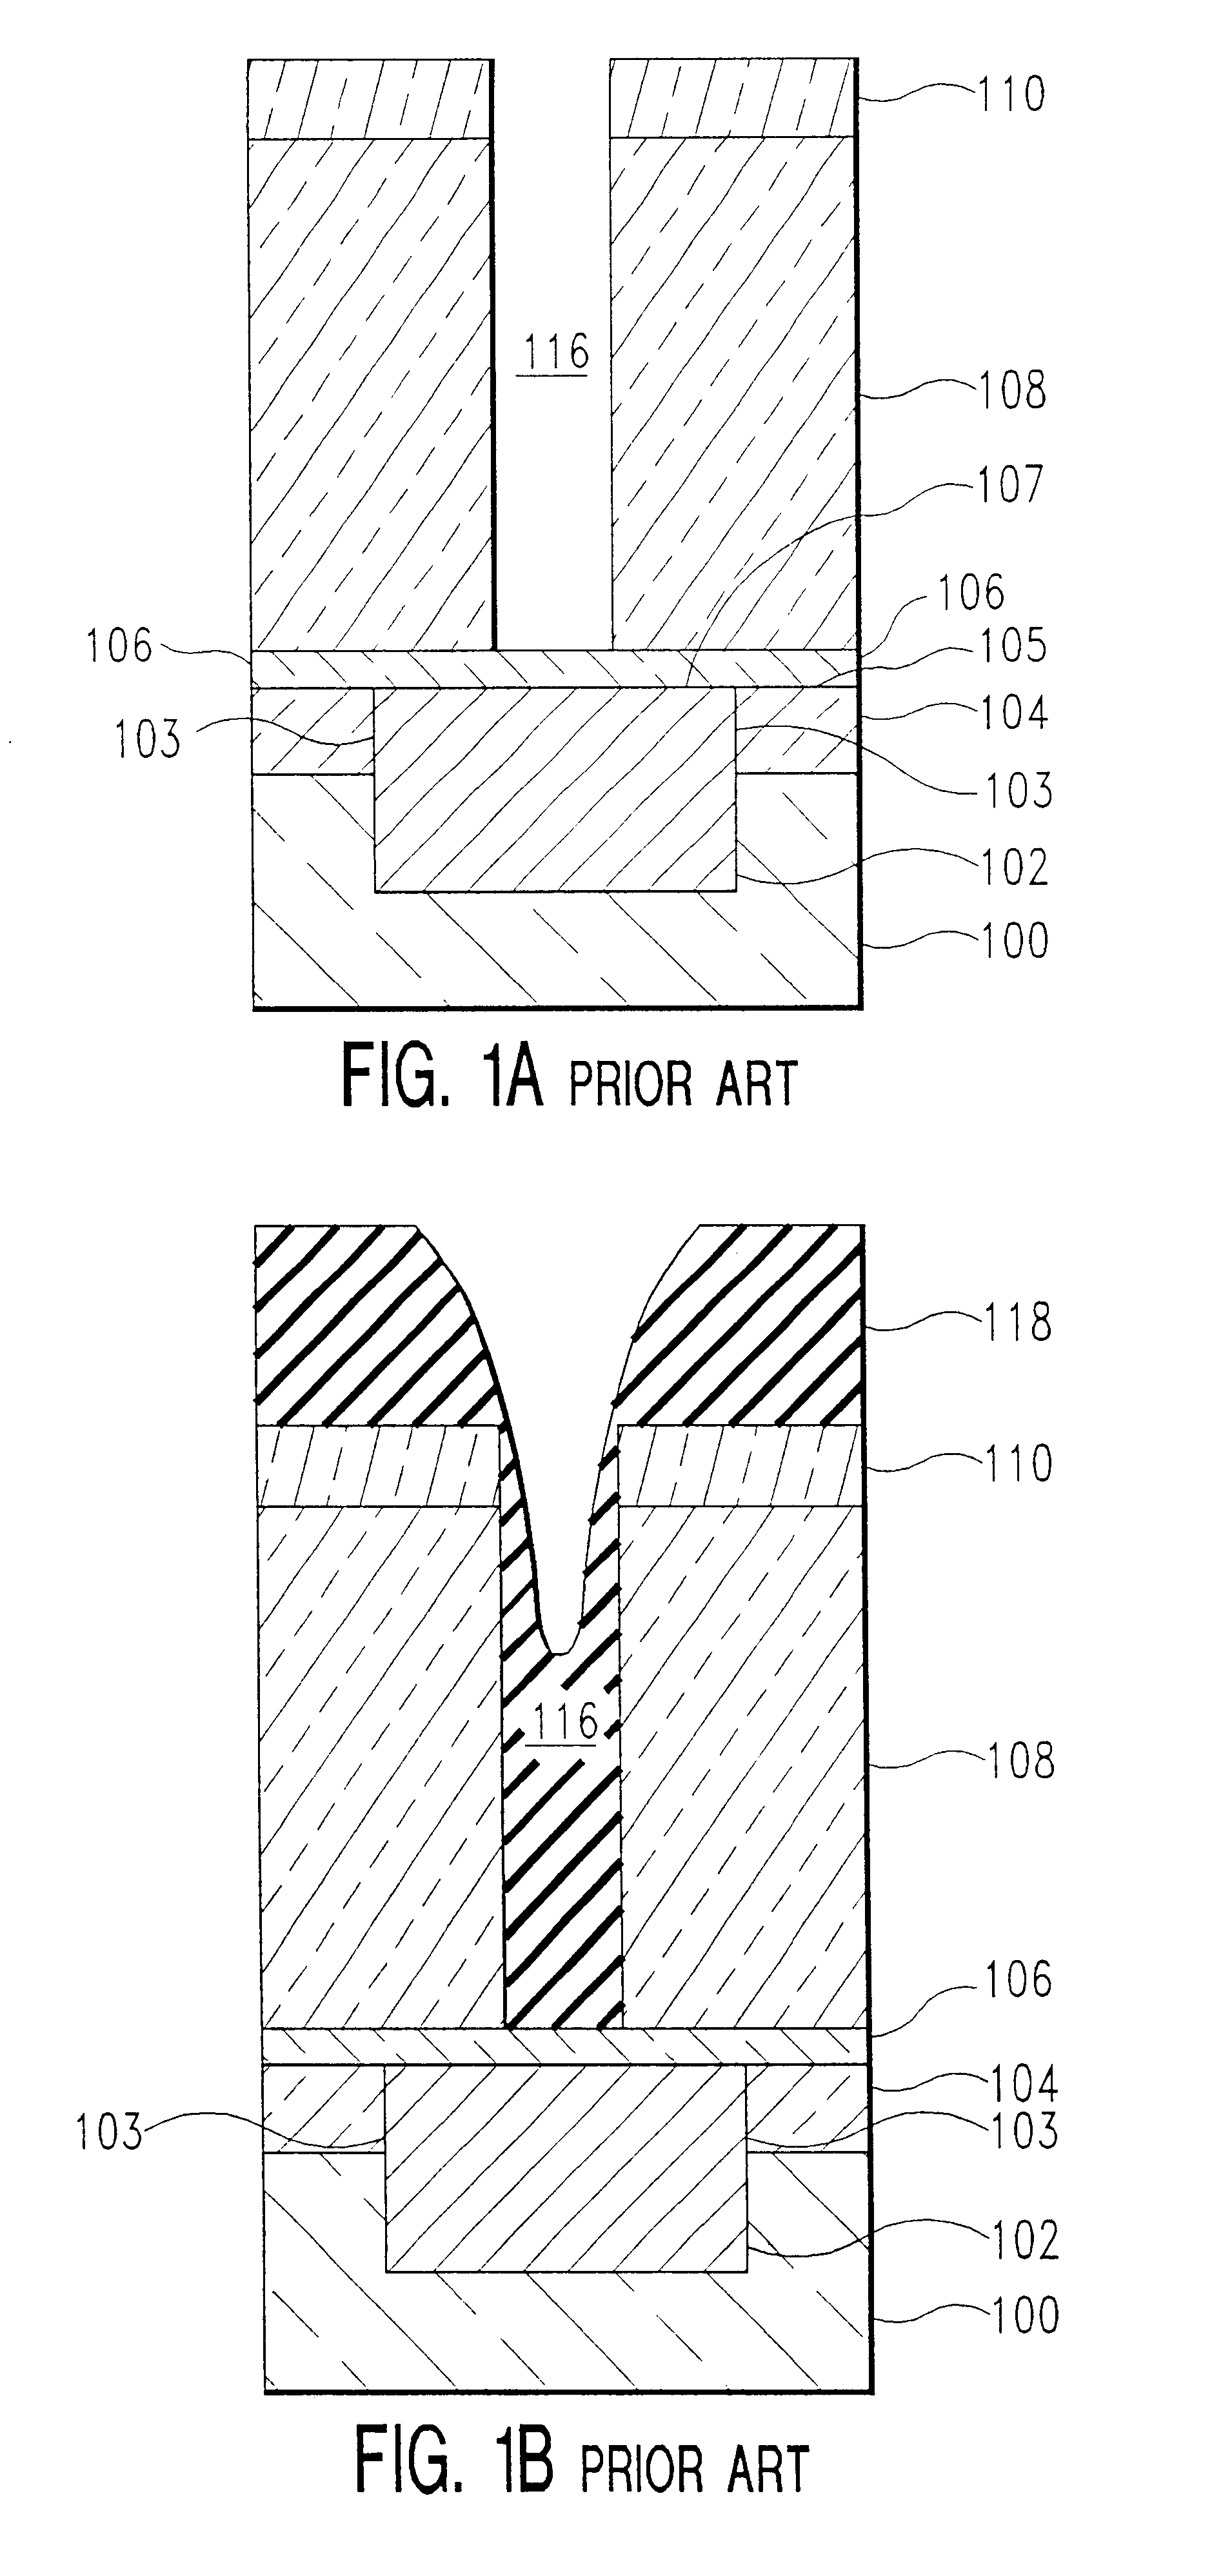 Method of reducing plasma charging damage during dielectric etch process for dual damascene interconnect structures